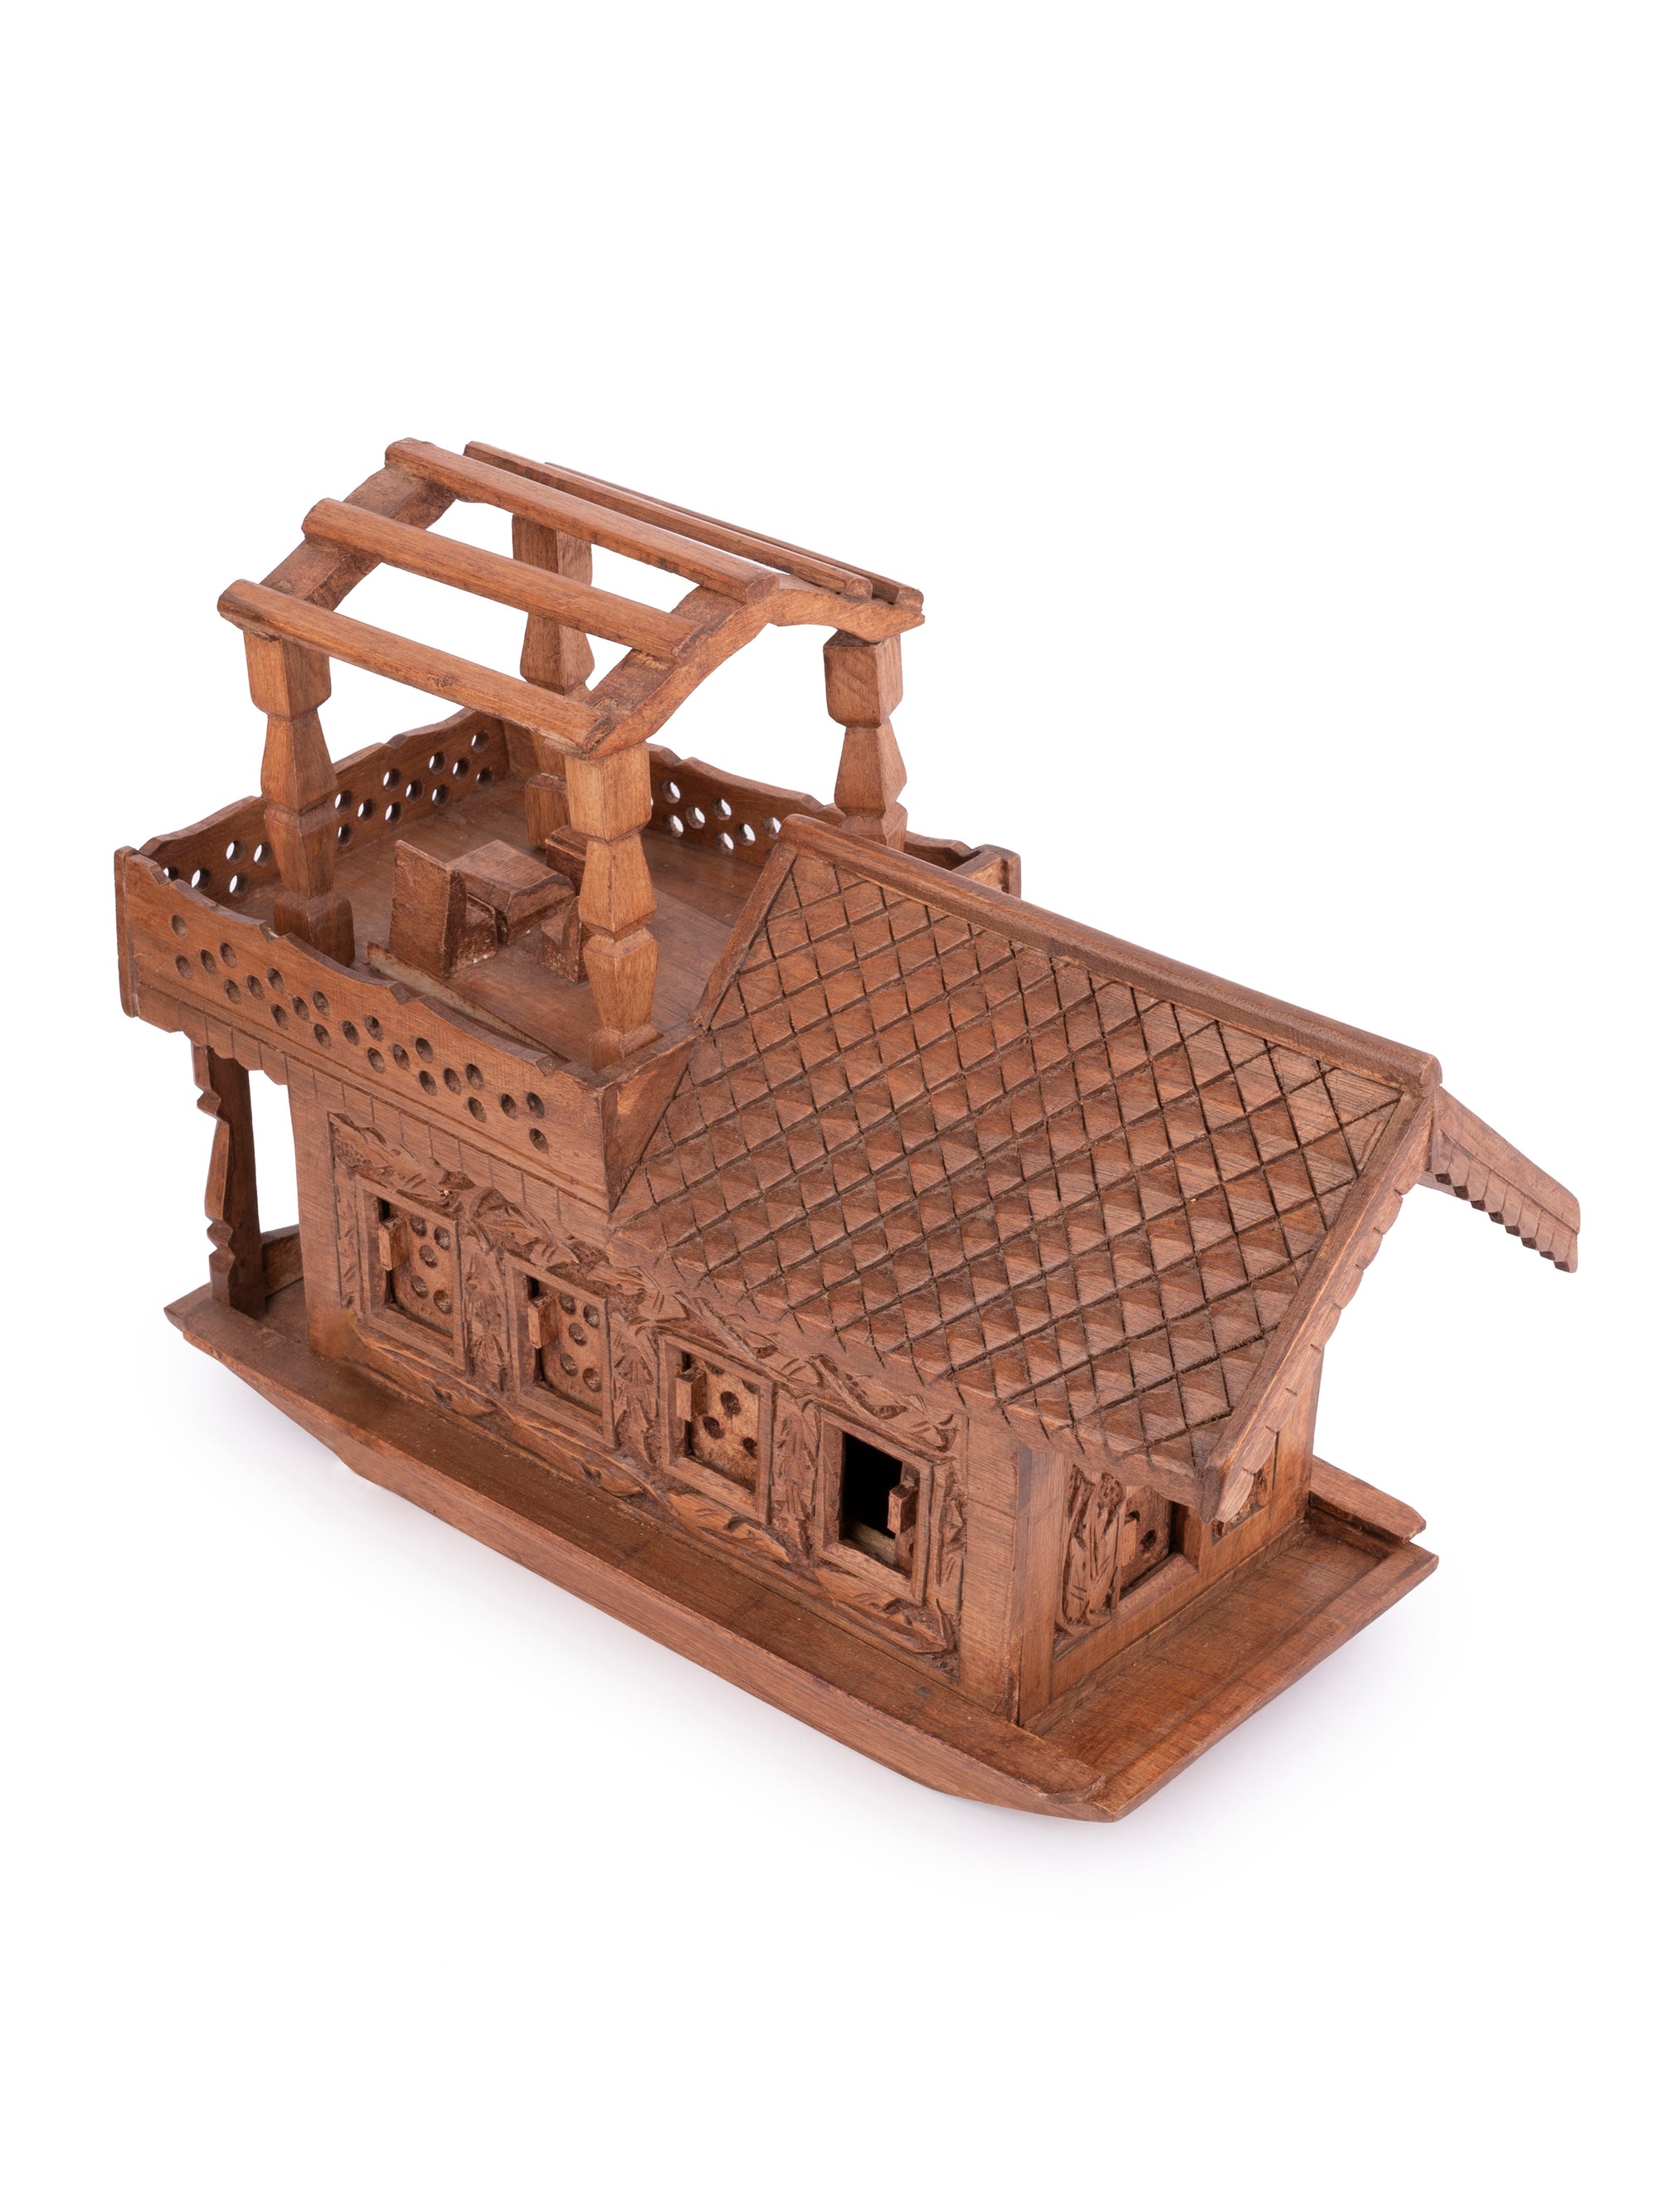 Walnut wood carved Kashmir House Boat with Lights - 18 inches long - The Heritage Artifacts